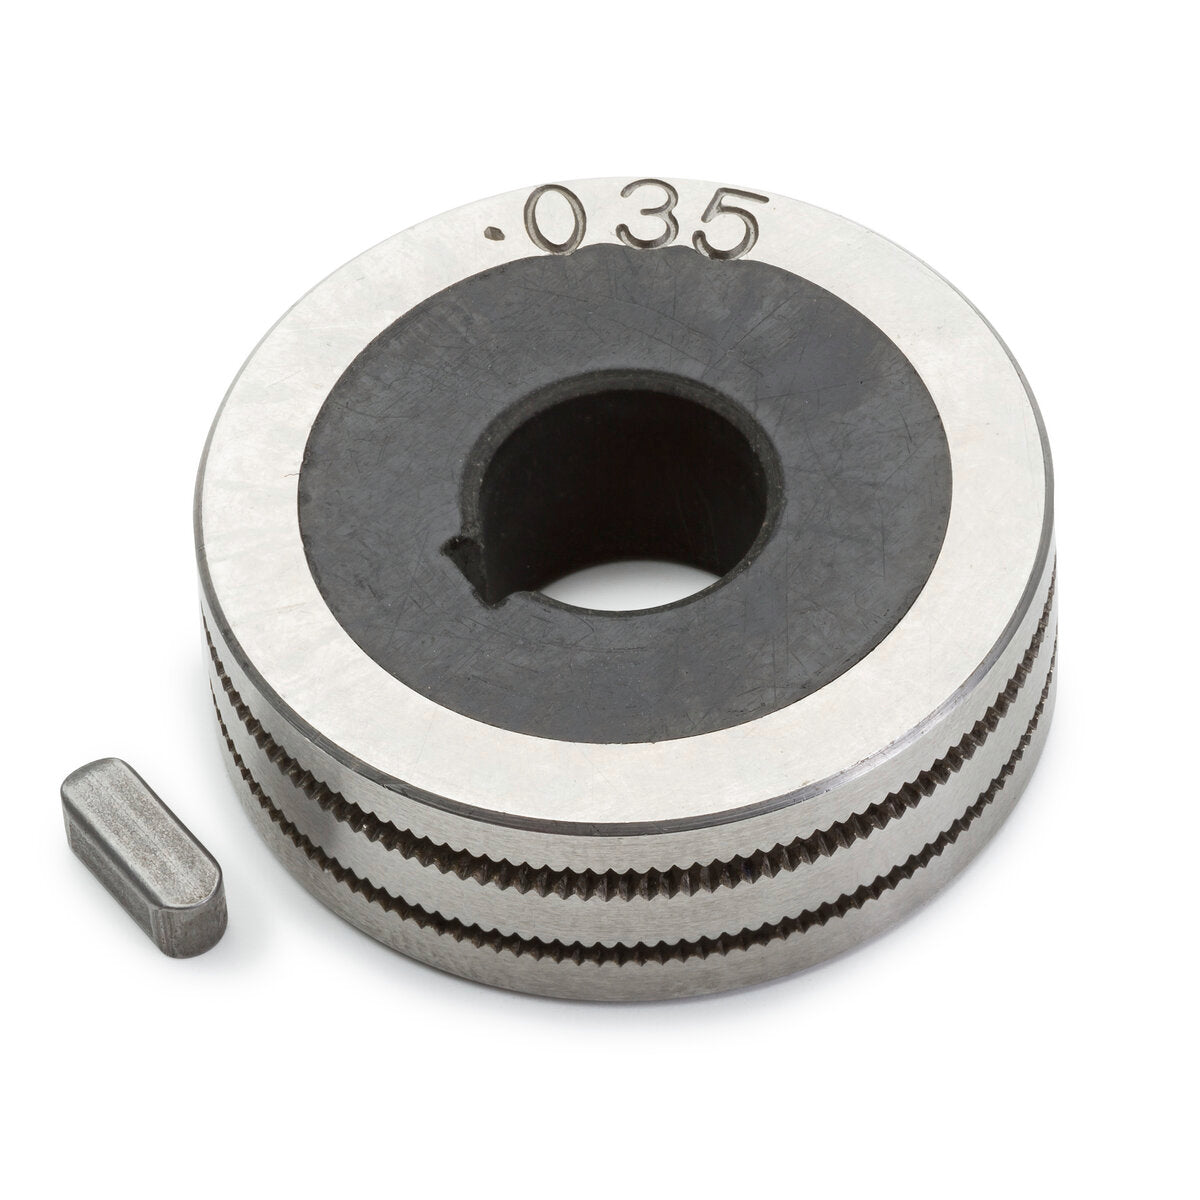 Lincoln Electric - Flux-Cored/MIG Wire Drive Roll .035 - .045 in (0.9 - 1.1 mm) - KP3285-1